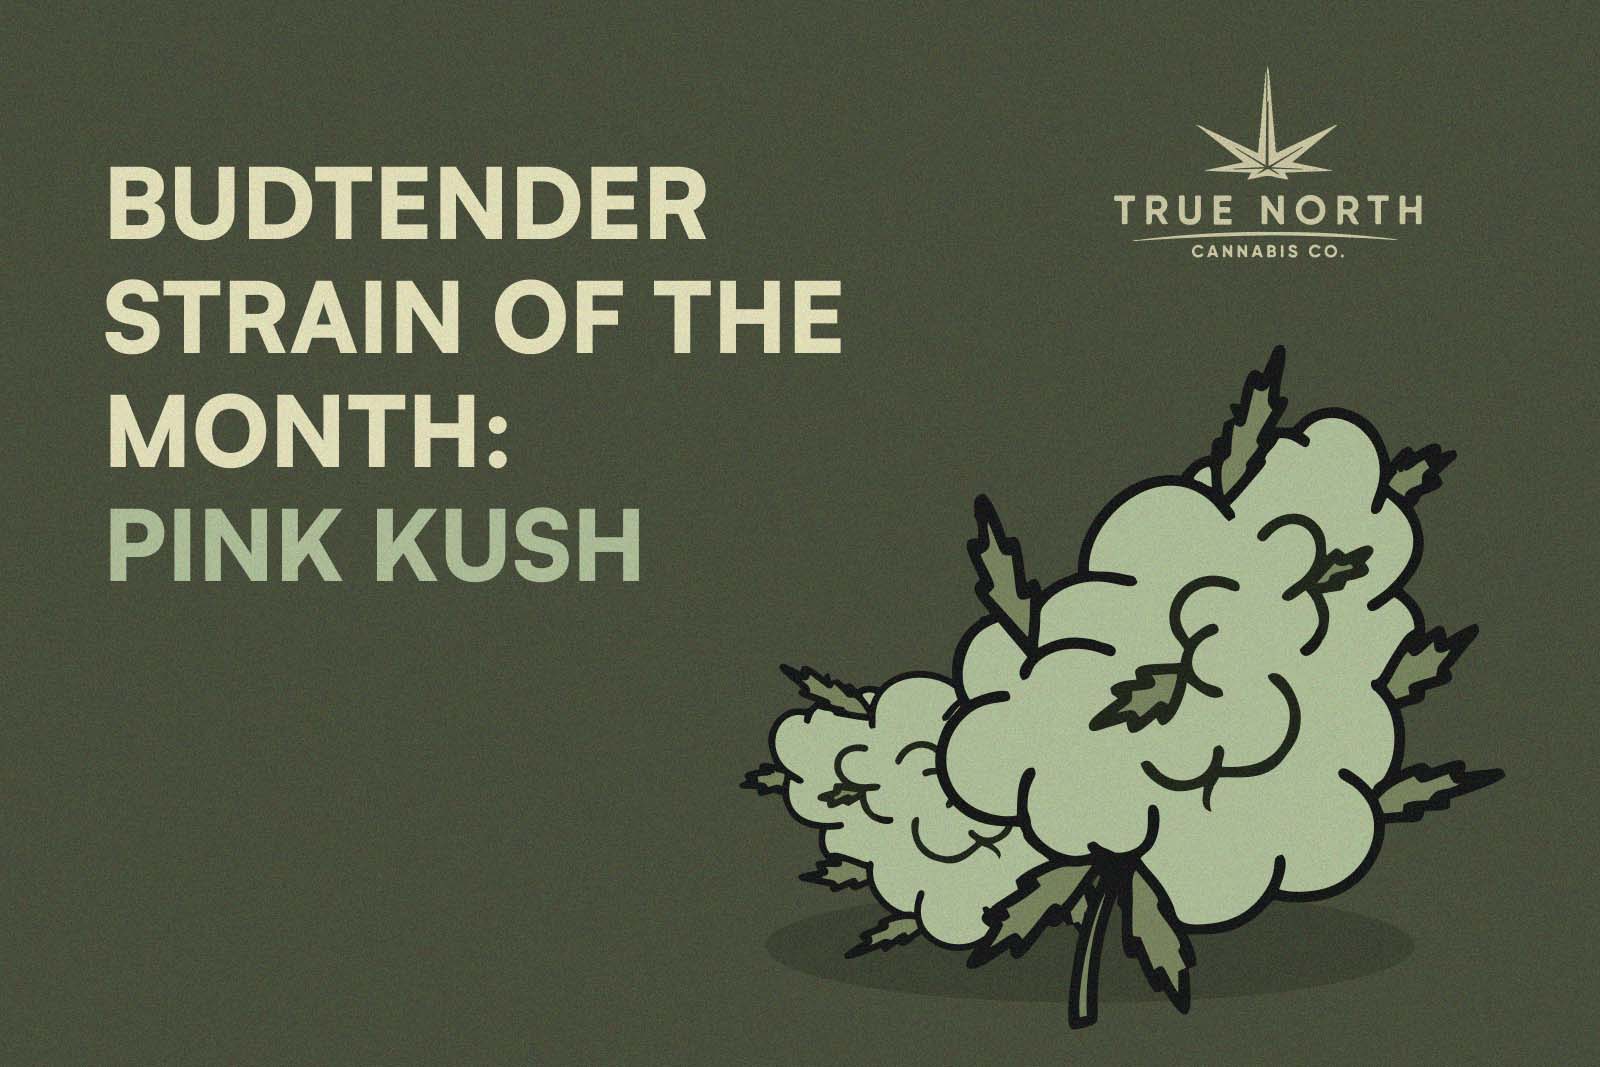 Budtender Strain Of The Month: Pink Kush - True North Cannabis Co